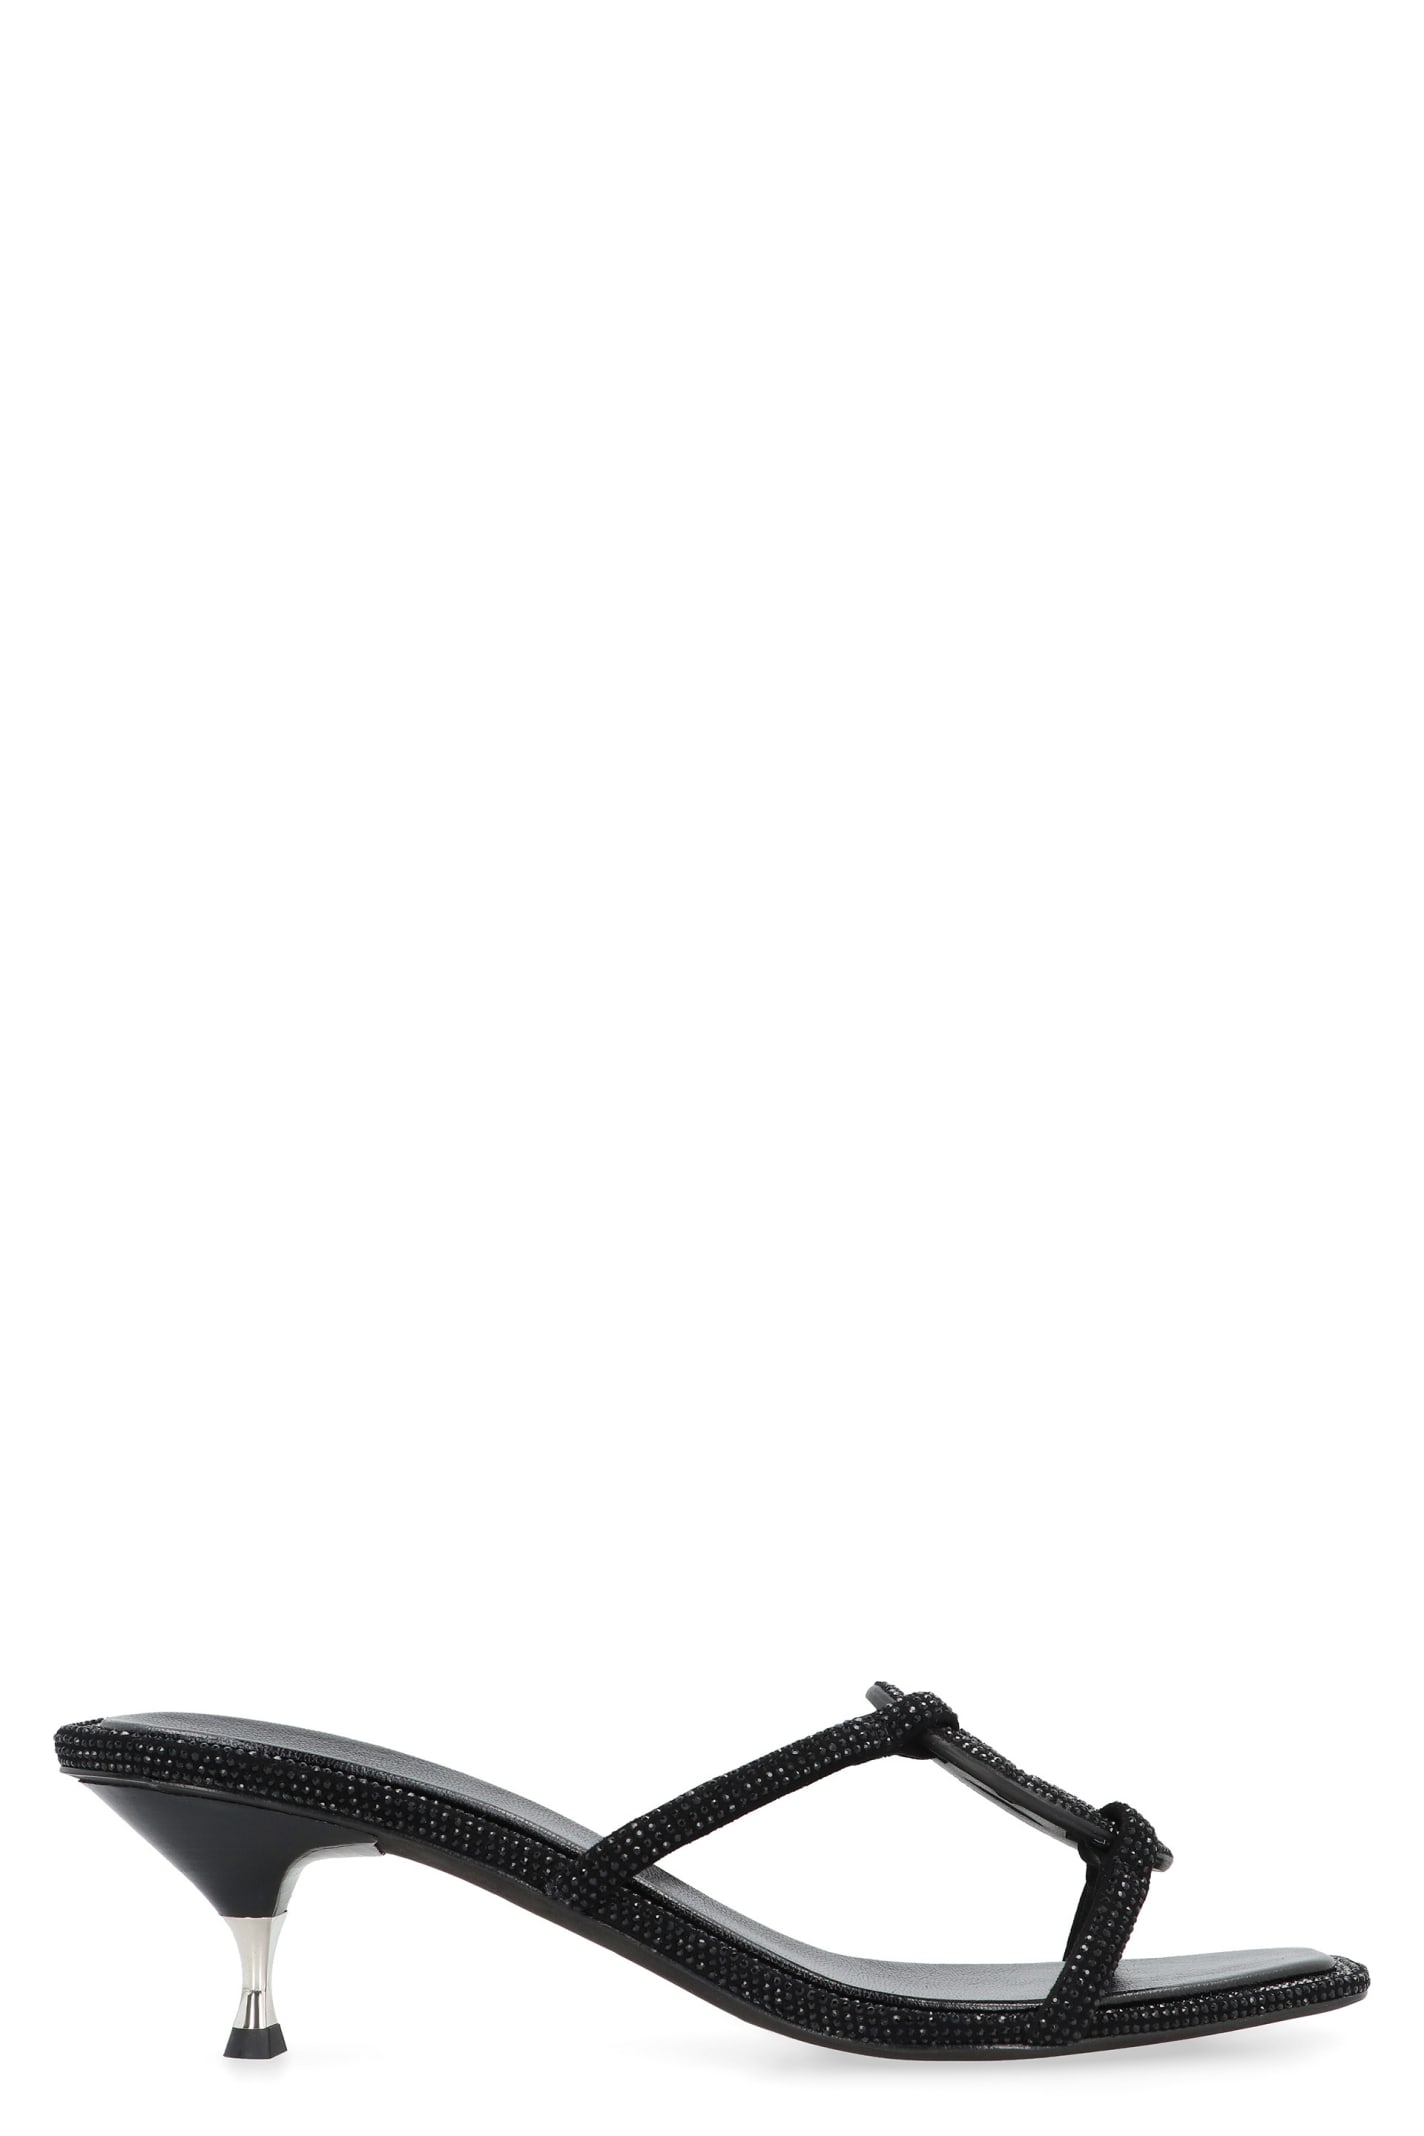 Shop Tory Burch Miller Leather Sandals